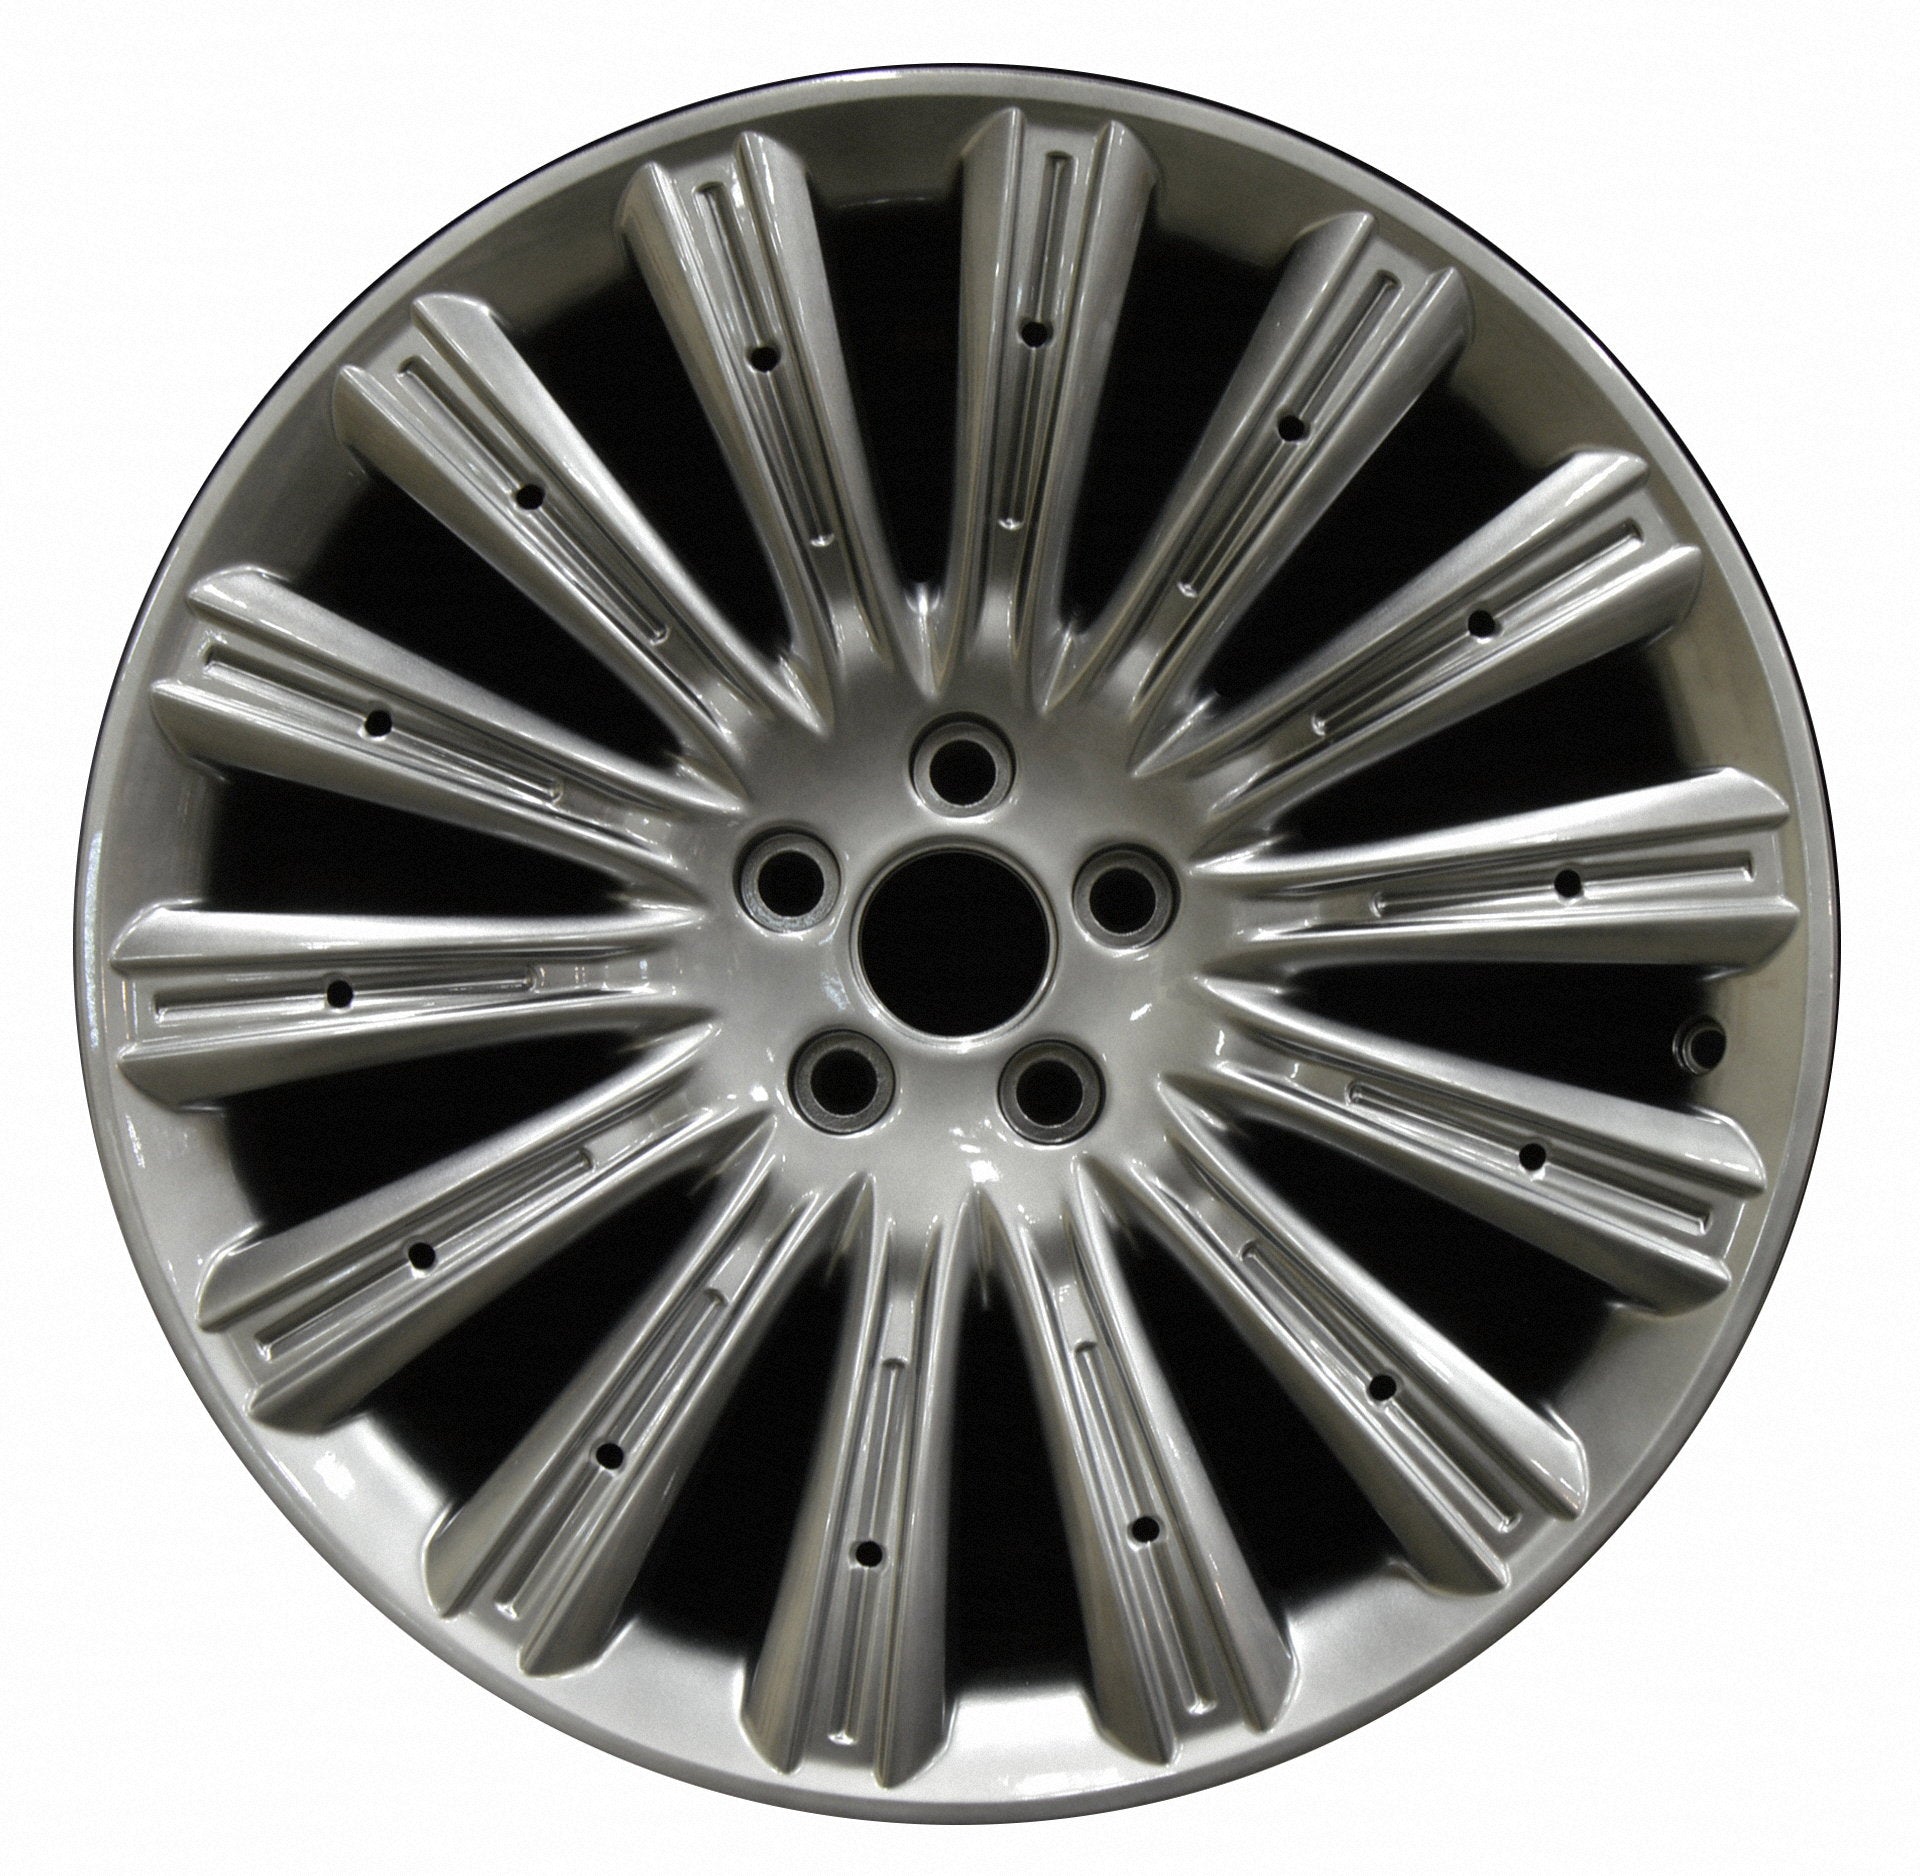 Lincoln MKS  2013, 2014, 2015, 2016 Factory OEM Car Wheel Size 20x8 Alloy WAO.3929.LS100V3.FFBRT